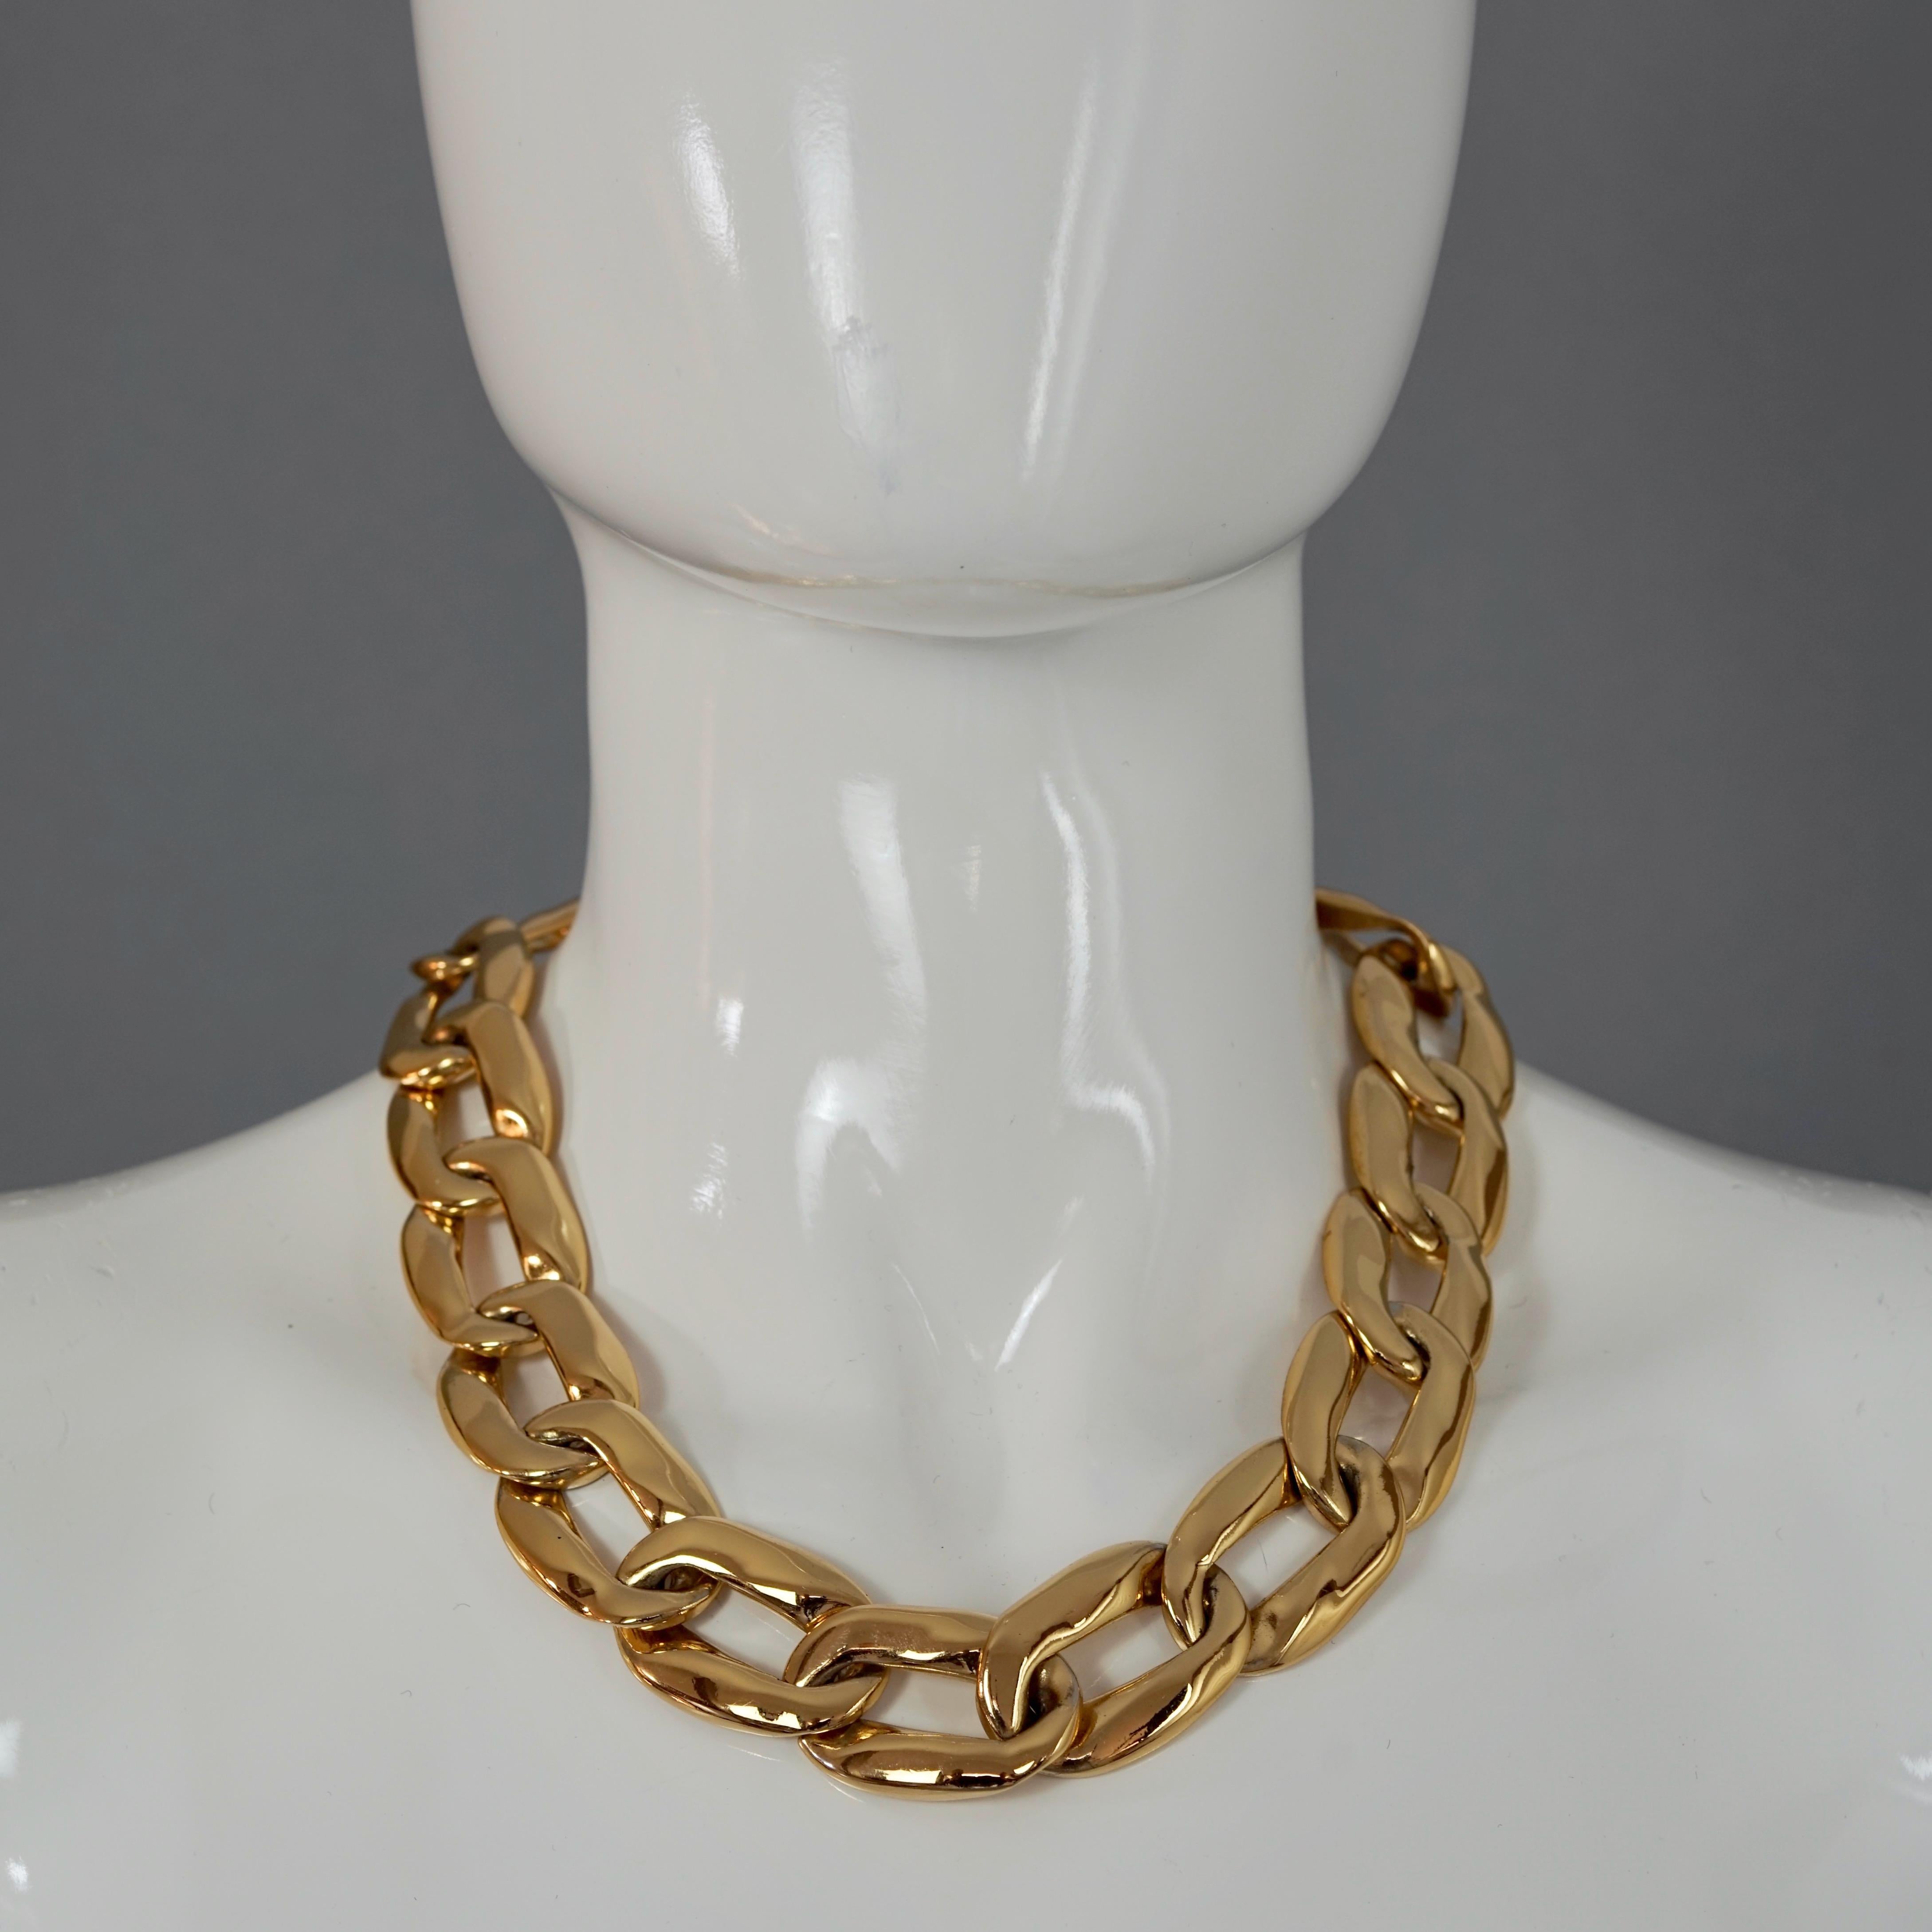 Vintage YVES SAINT LAURENT Ysl by Robert Goossens Chunky Chain Necklace

Measurements:
Height: 1 inches (2.54 cm)
Wearable Length: 17.91 inches (45.5 cm) to 19.68 inches (50 cm)

Features:
- 100% Authentic YVES SAINT LAURENT by Robert Goossens.
-